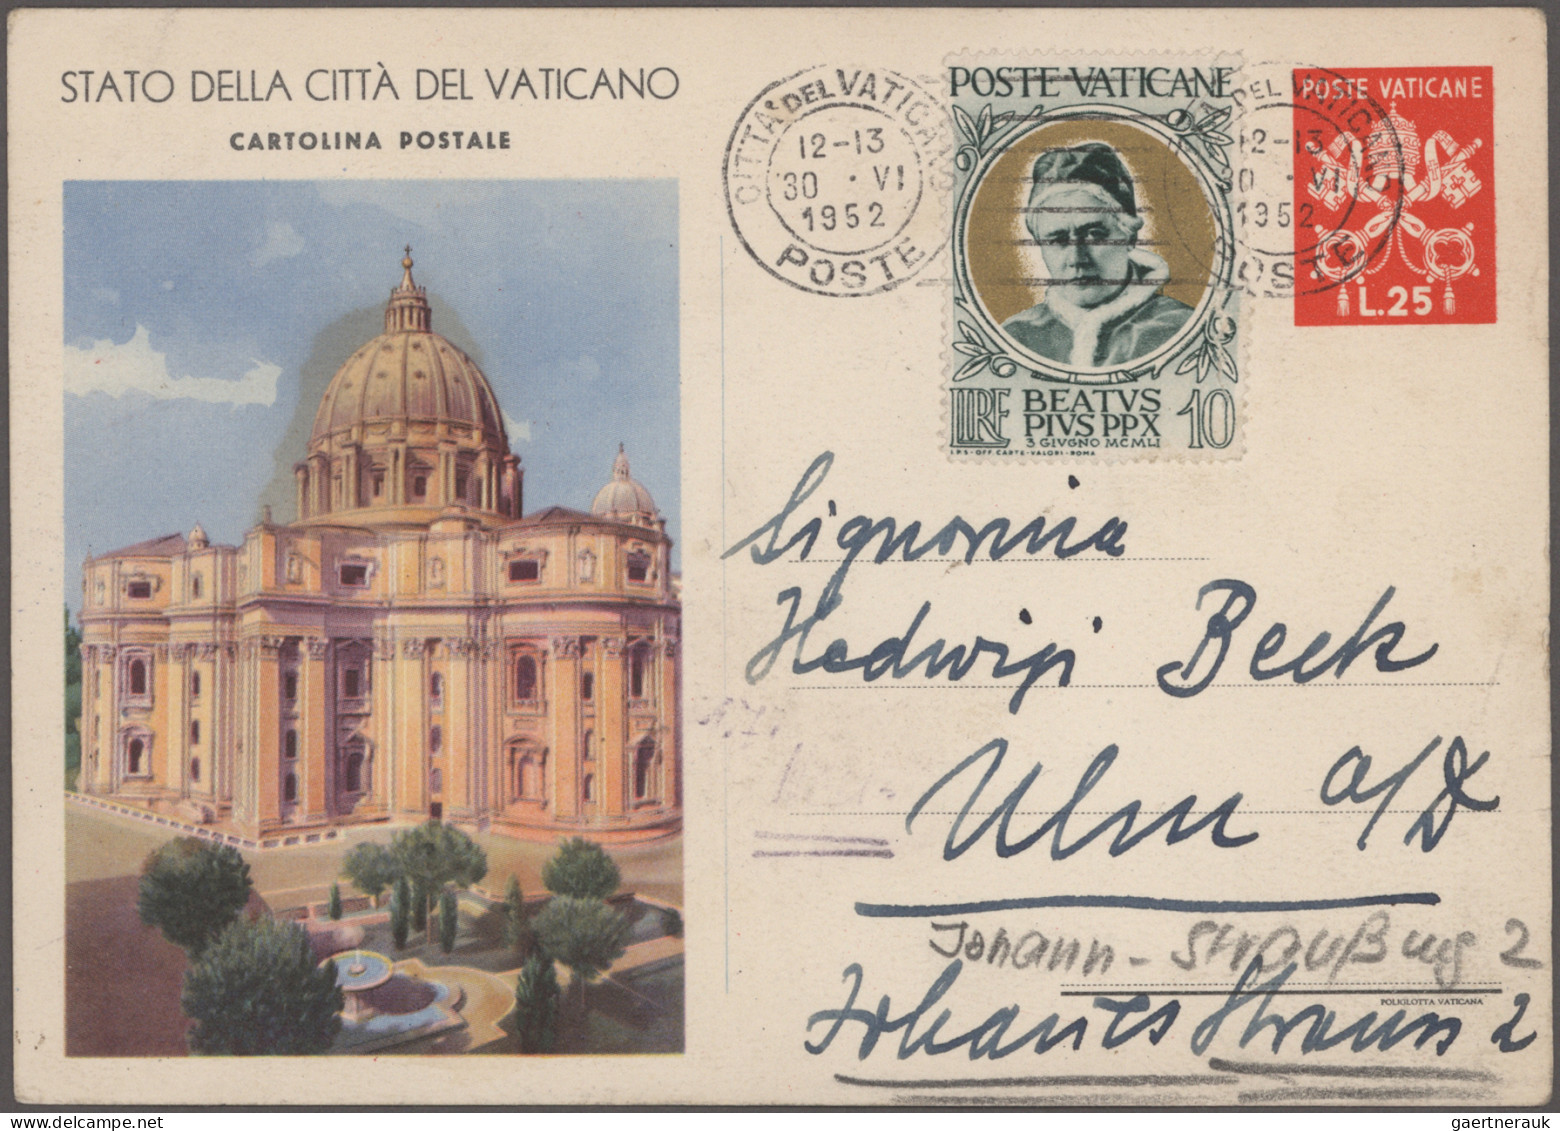 Vatican City: 1950/2005, balance of apprx. 300 philatelic covers/cards, incl. st